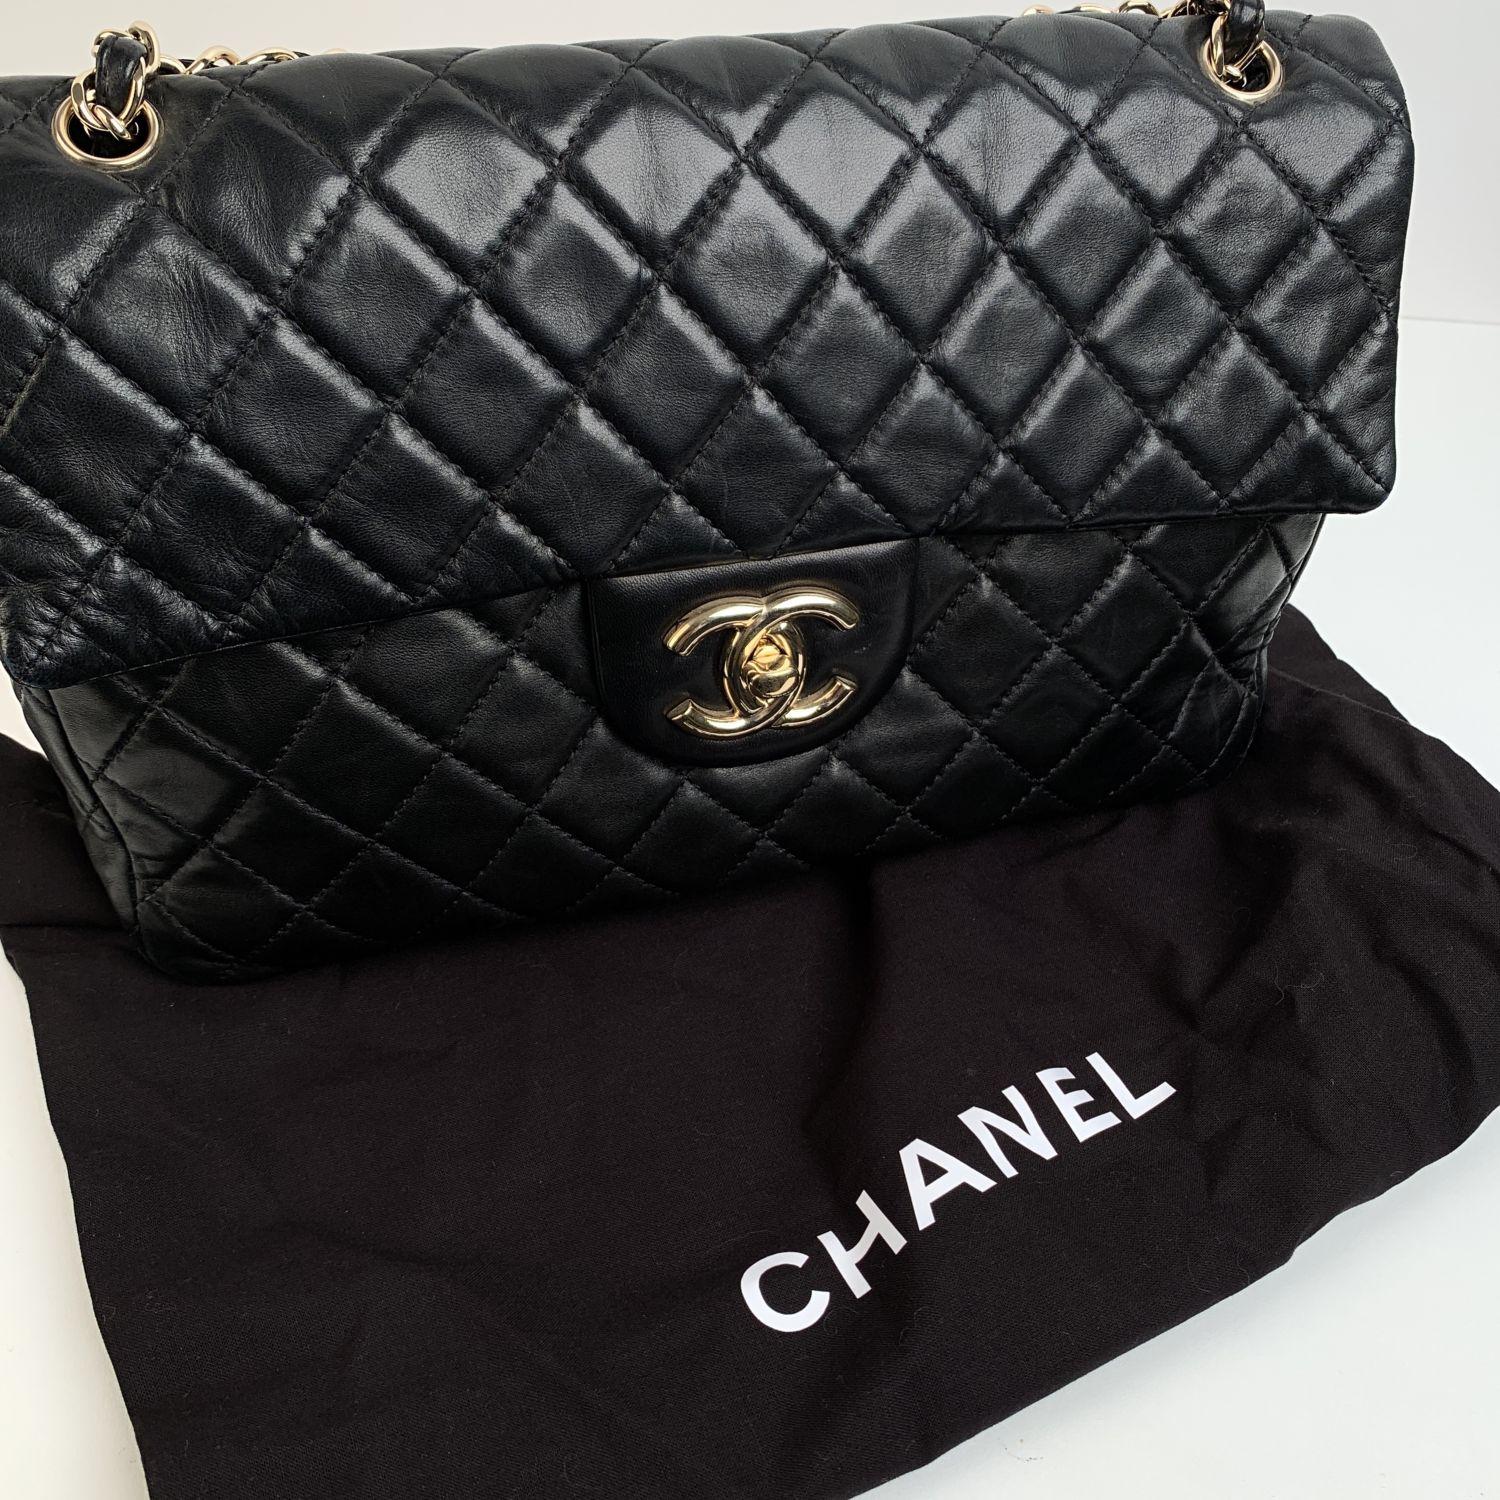 Chanel Black Quilted Leather Jumbo Classic Flap 2.55 Shoulder Bag 6